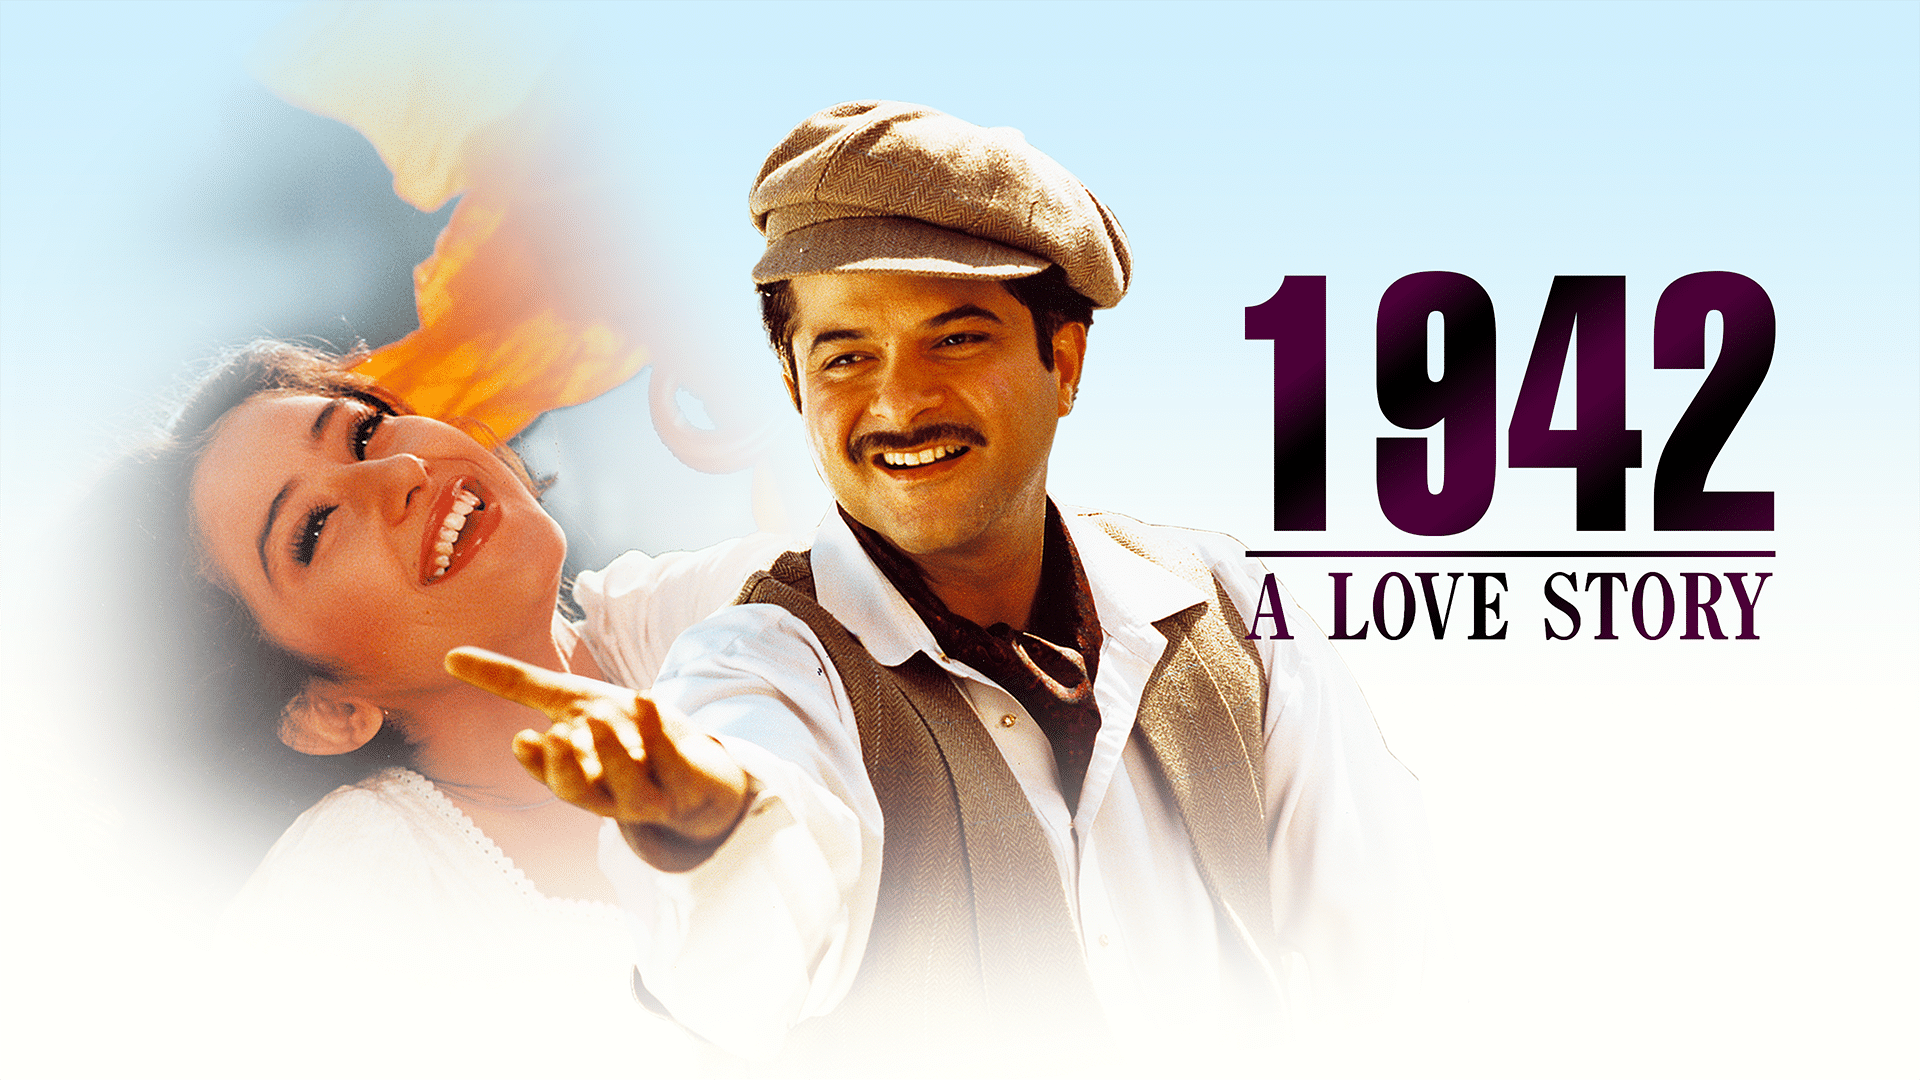 1942 love story audio songs free download